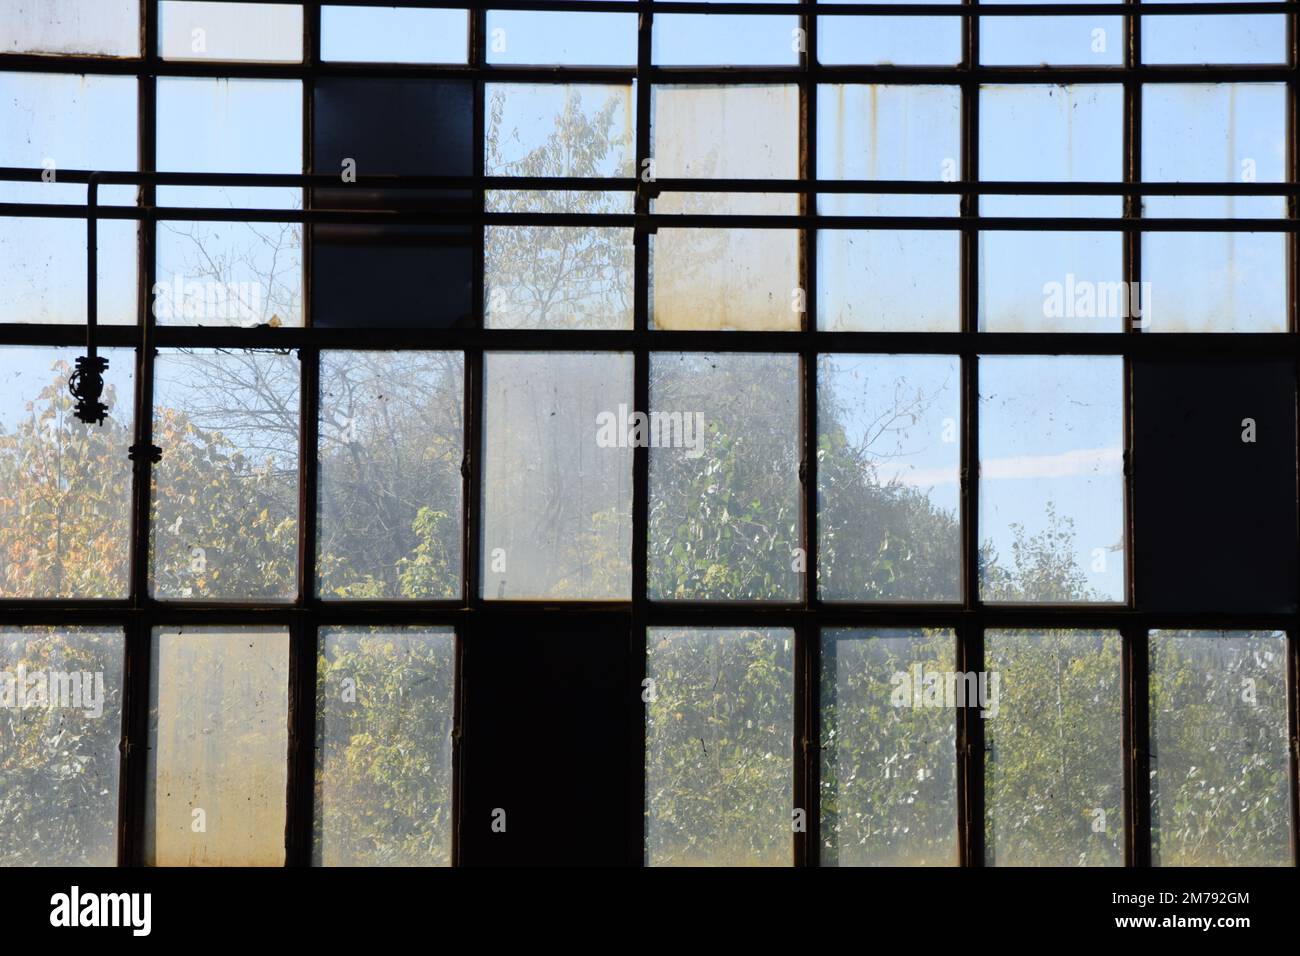 A grid with windows, some of them are closed Stock Photo